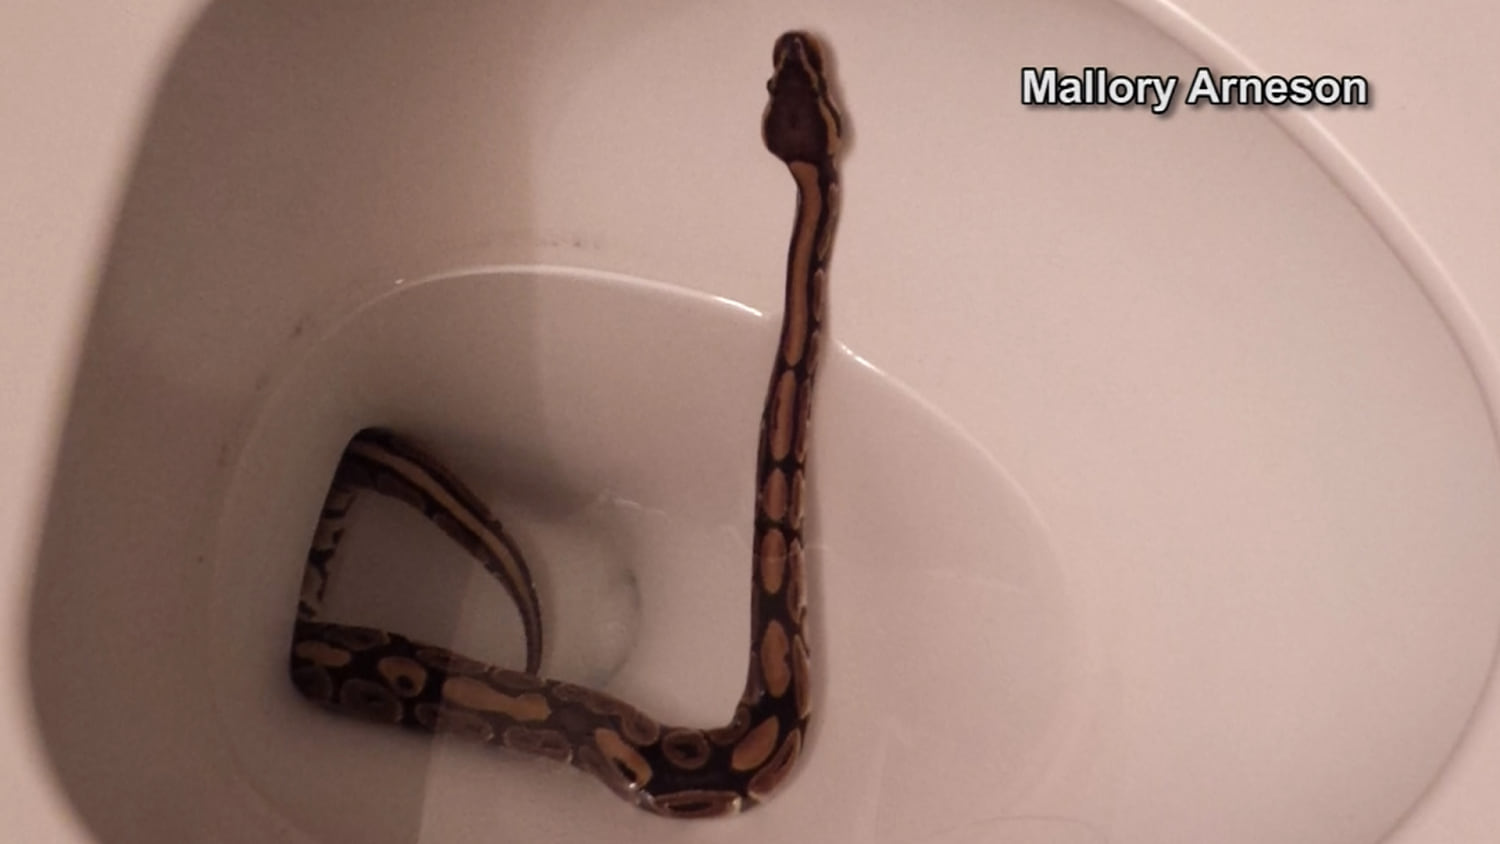 Woman Finds Snake In Toilet